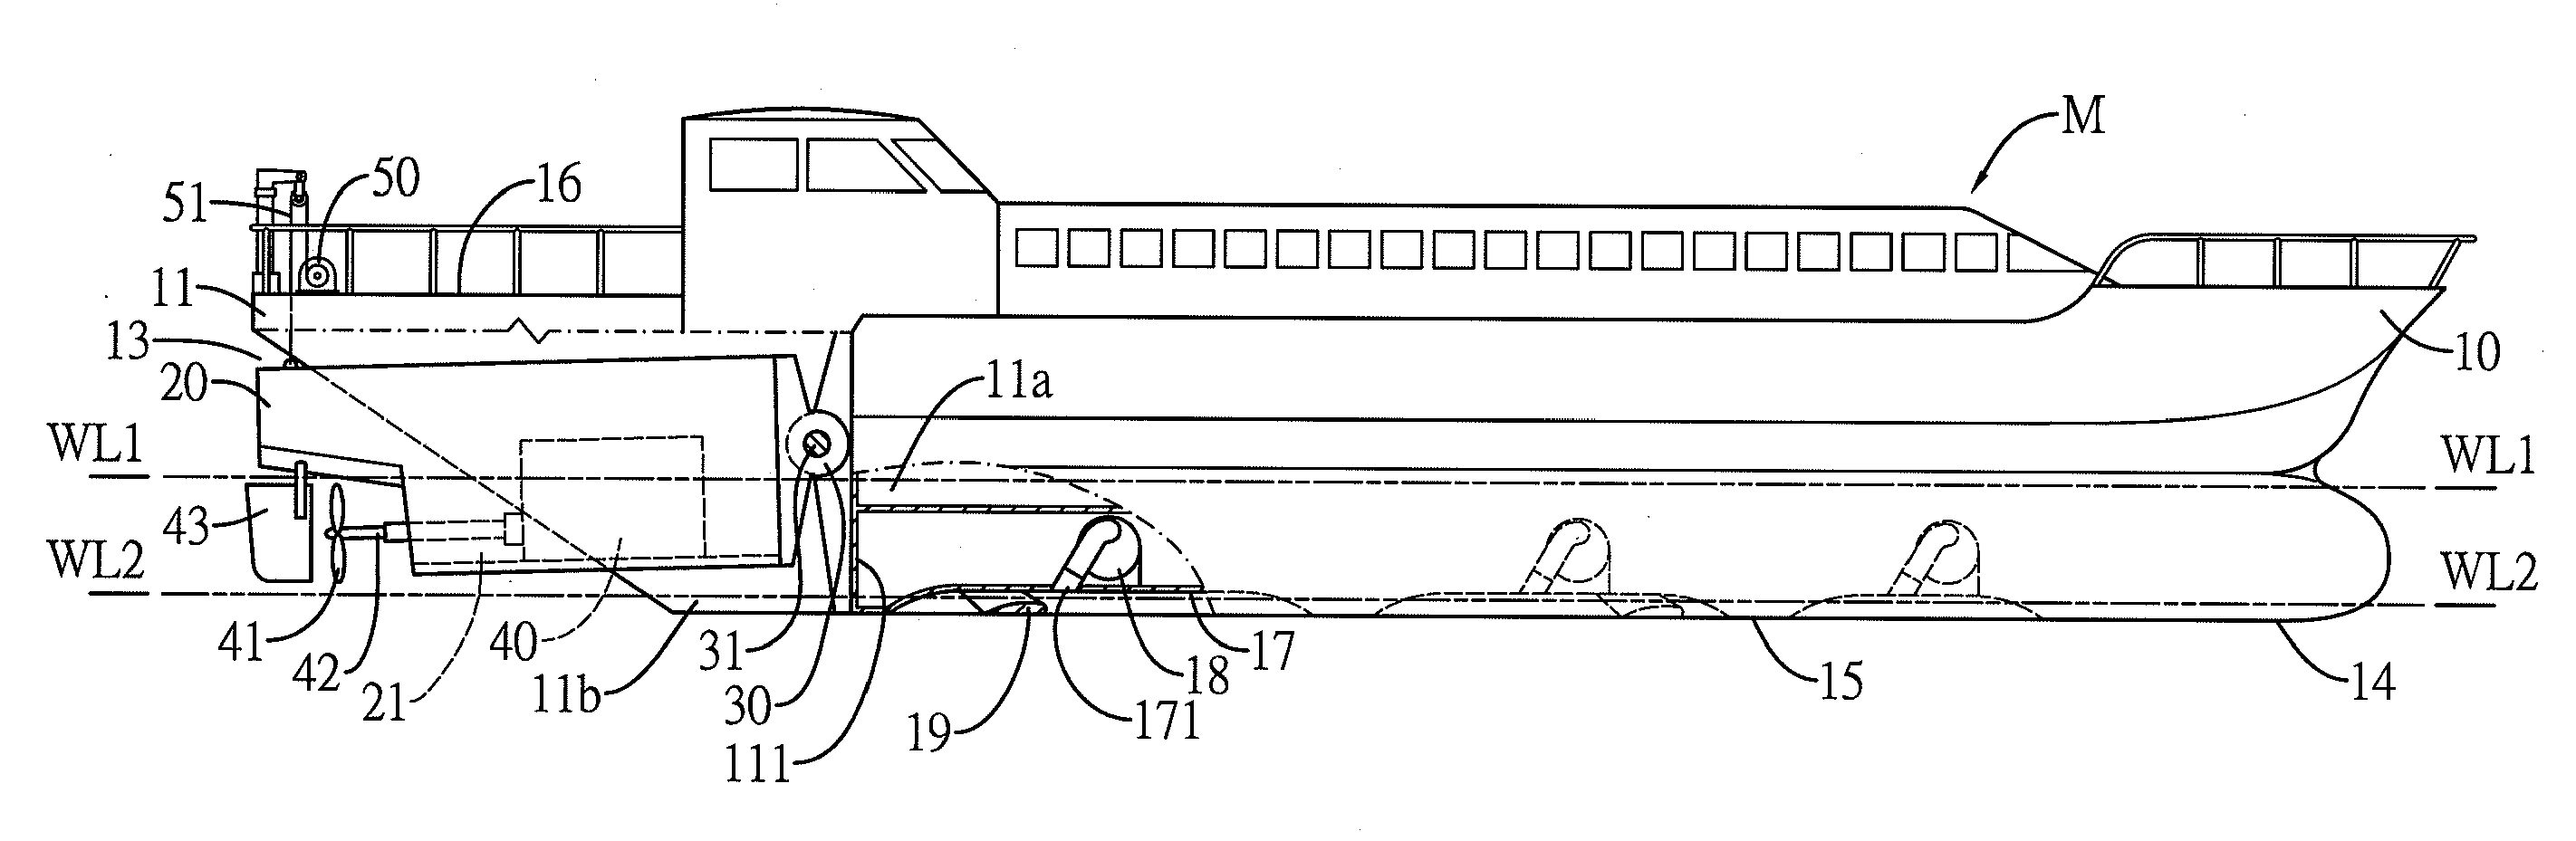 Ship hull structure and a method of operating the ship